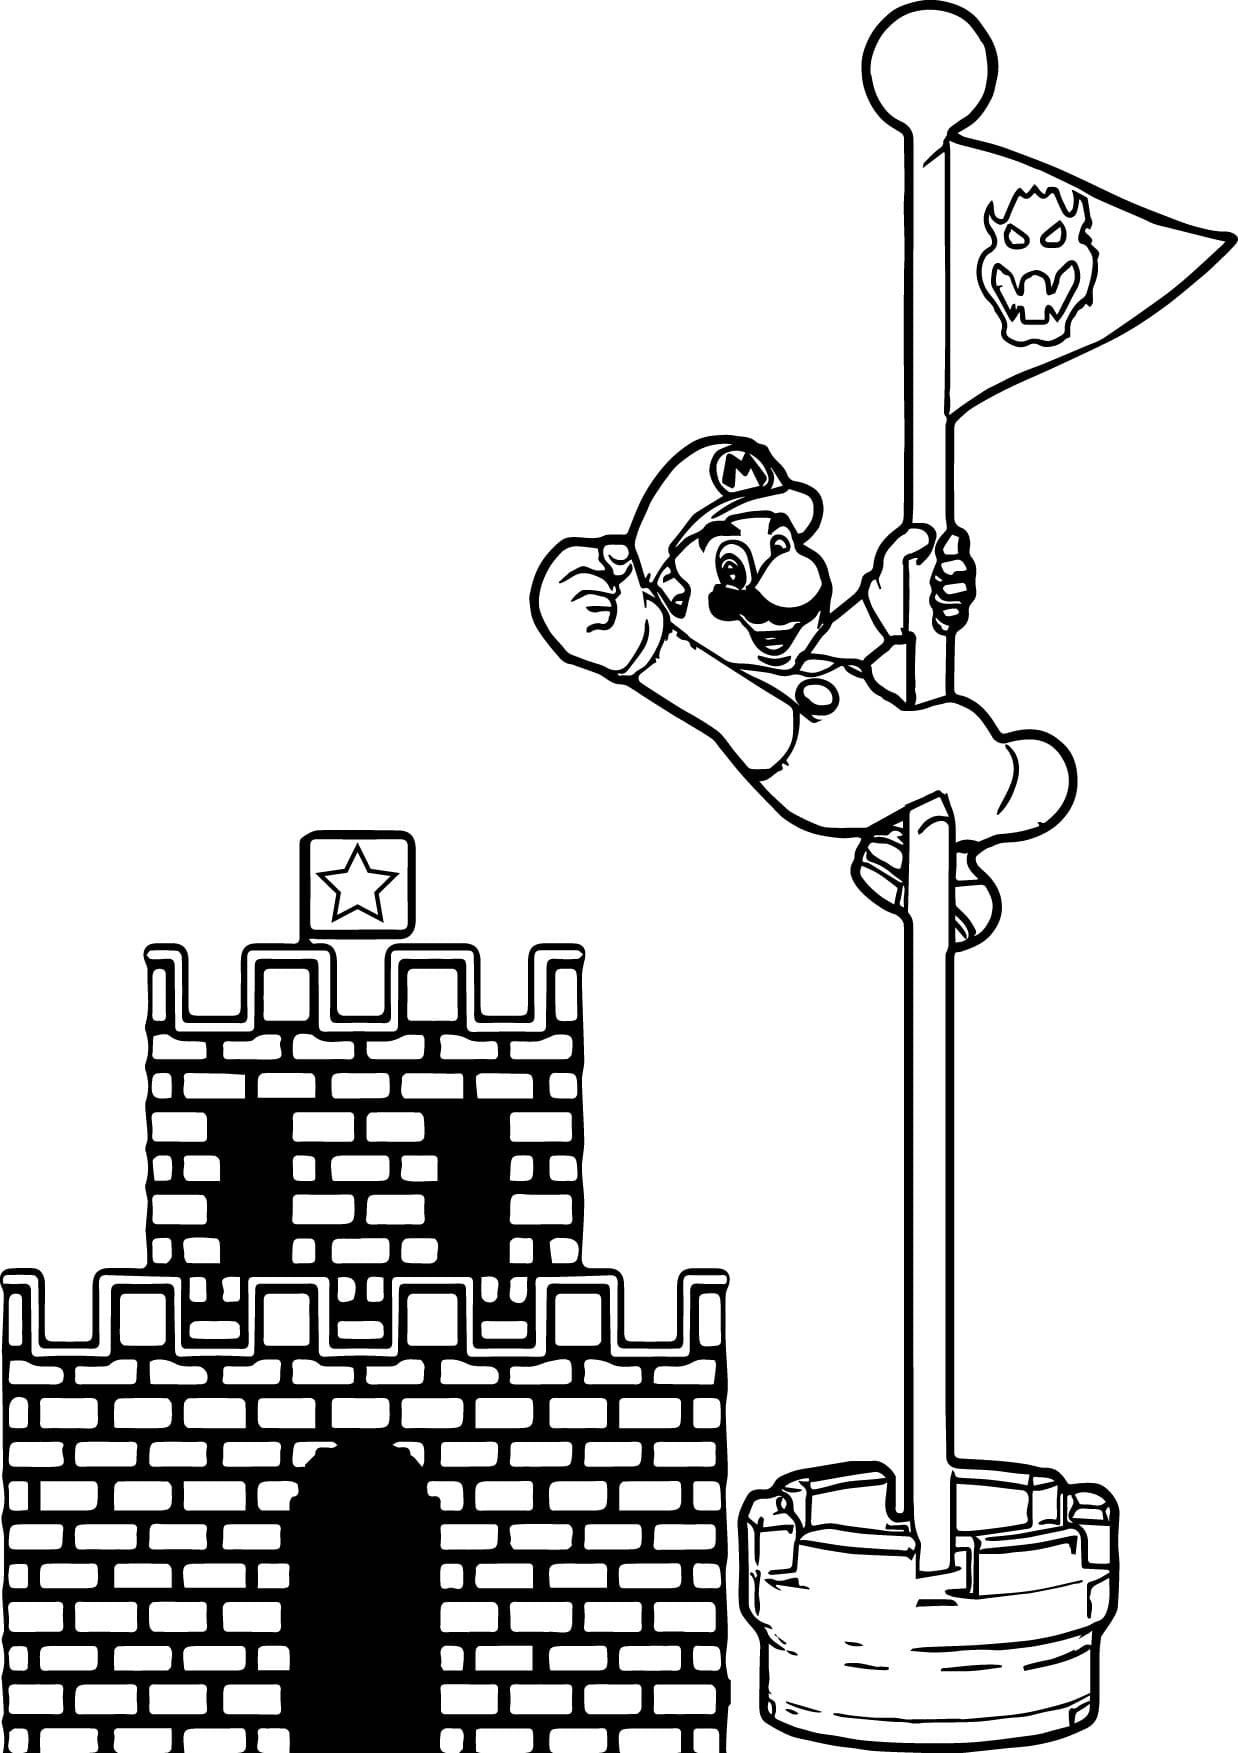 Drawing 16 of Super Mario to print and color